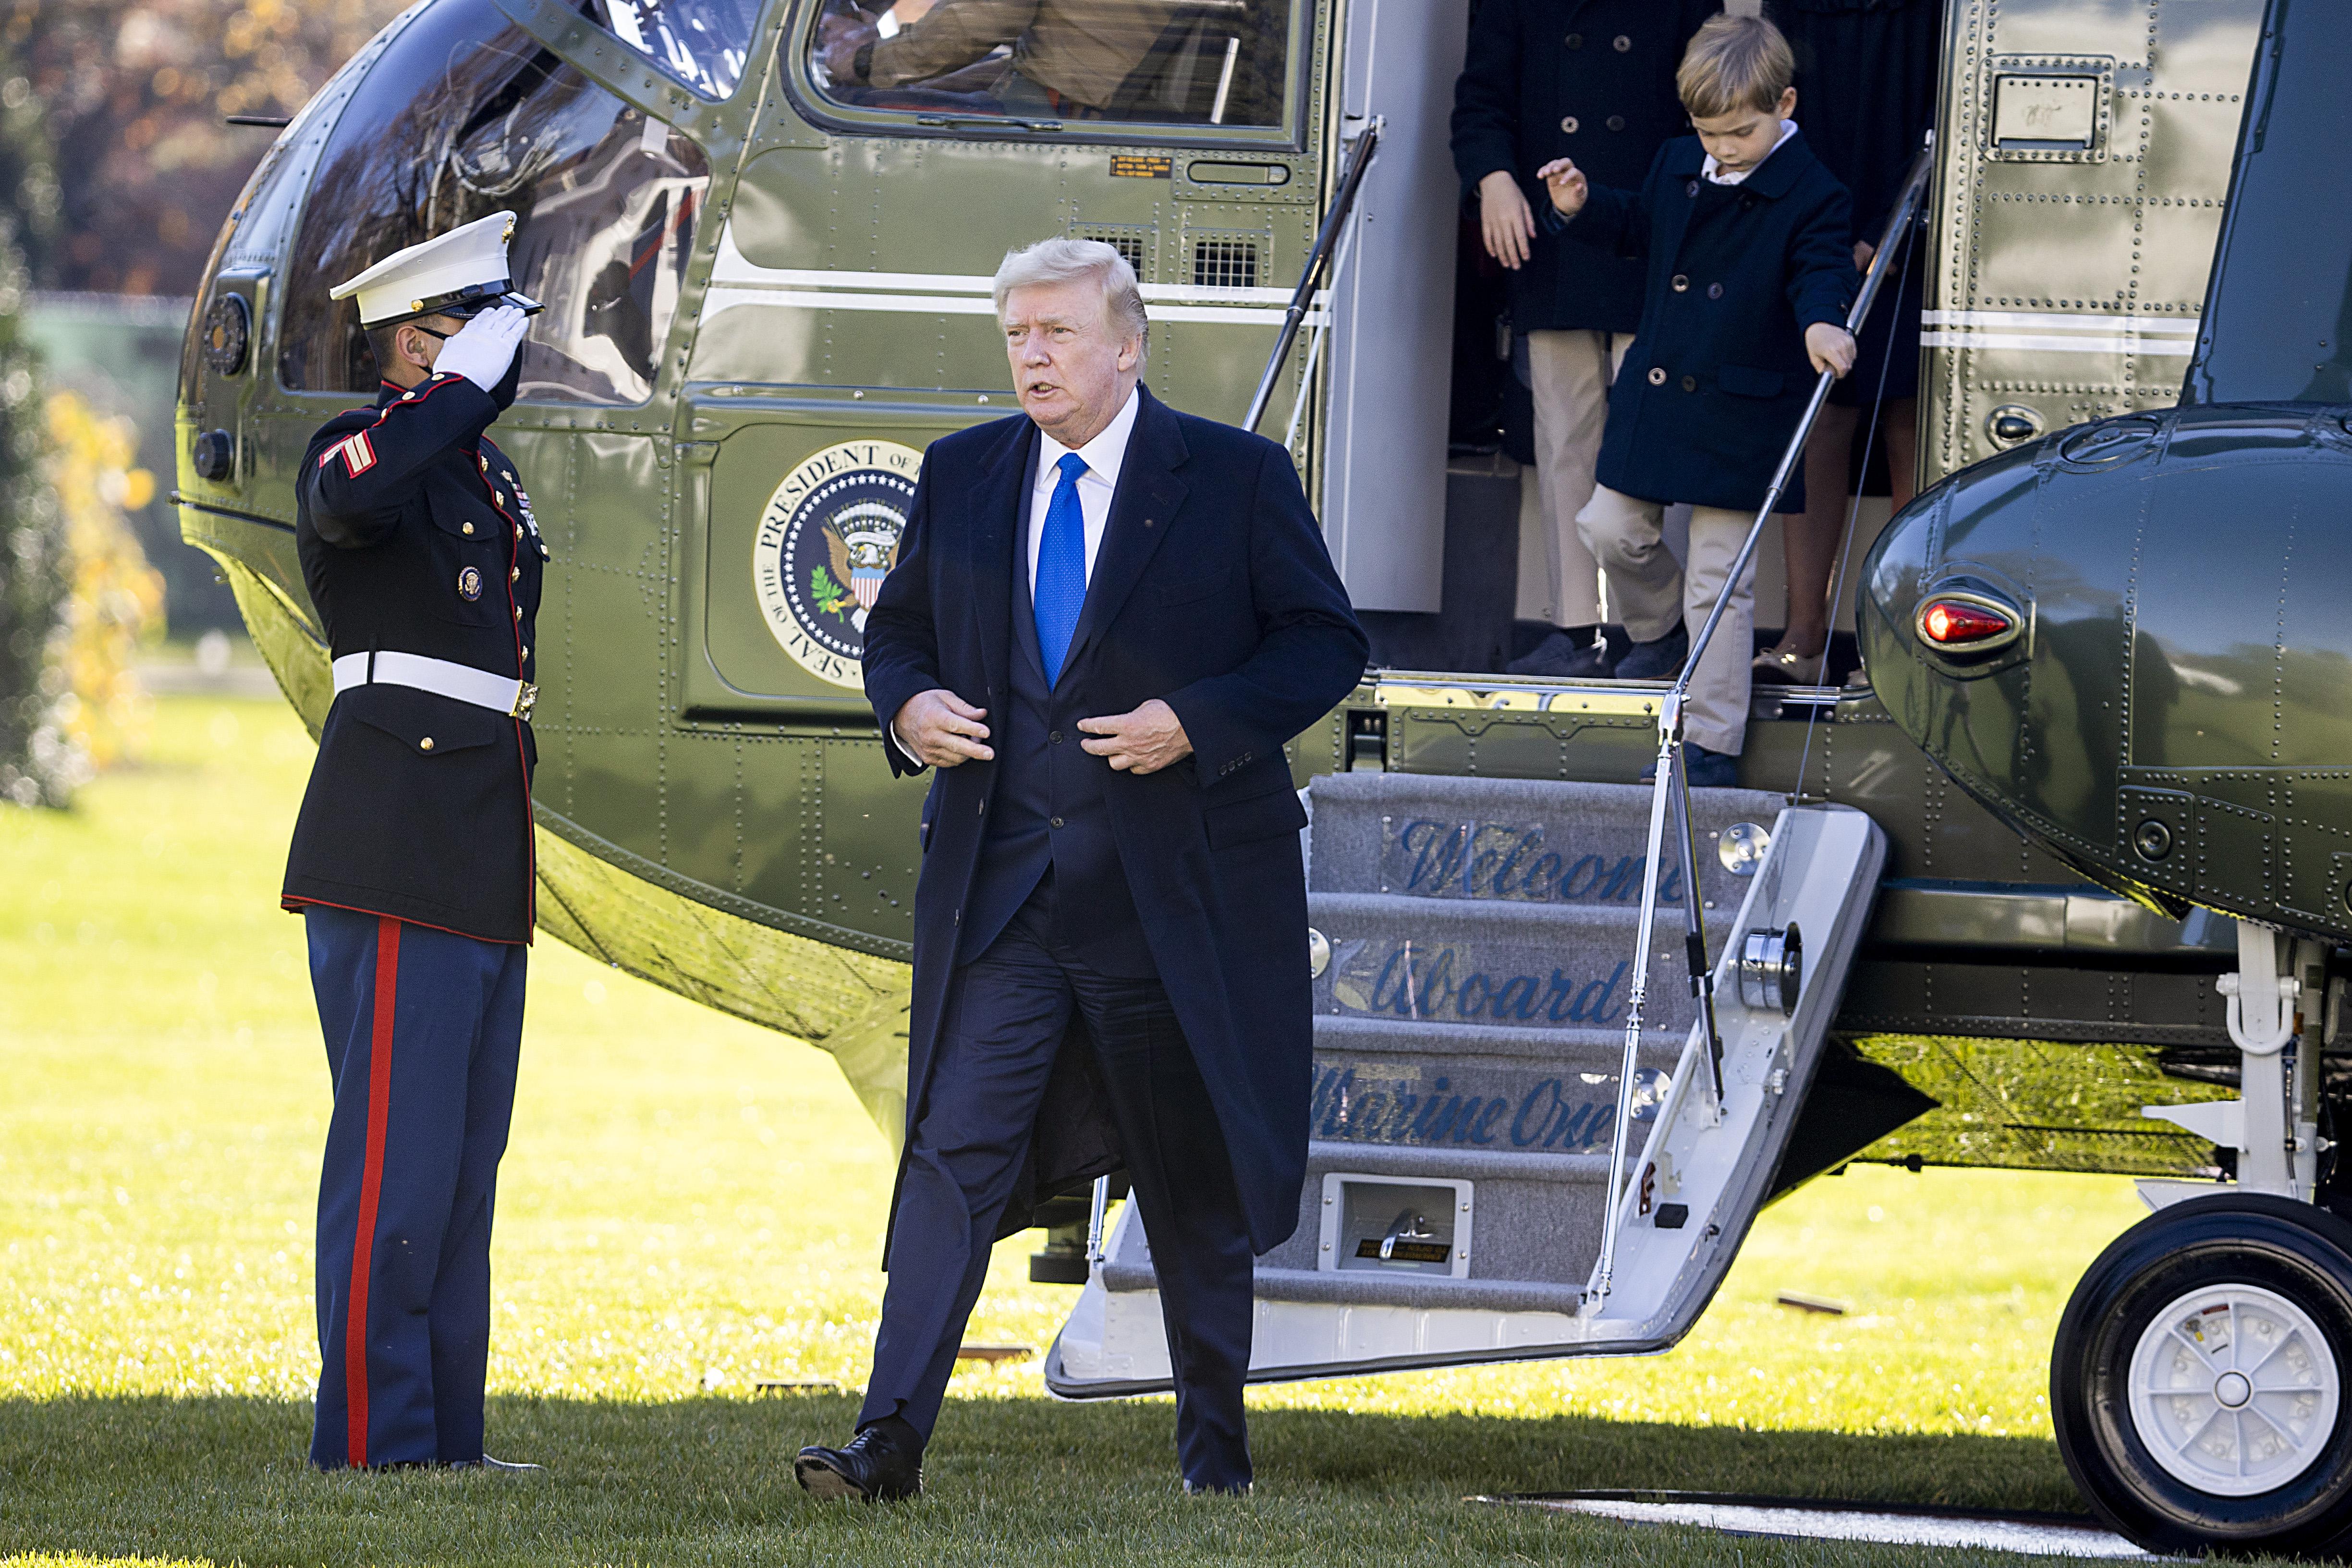 Trump walks away from Marine One on the South Lawn of the White House, past a uniformed service member saluting him.